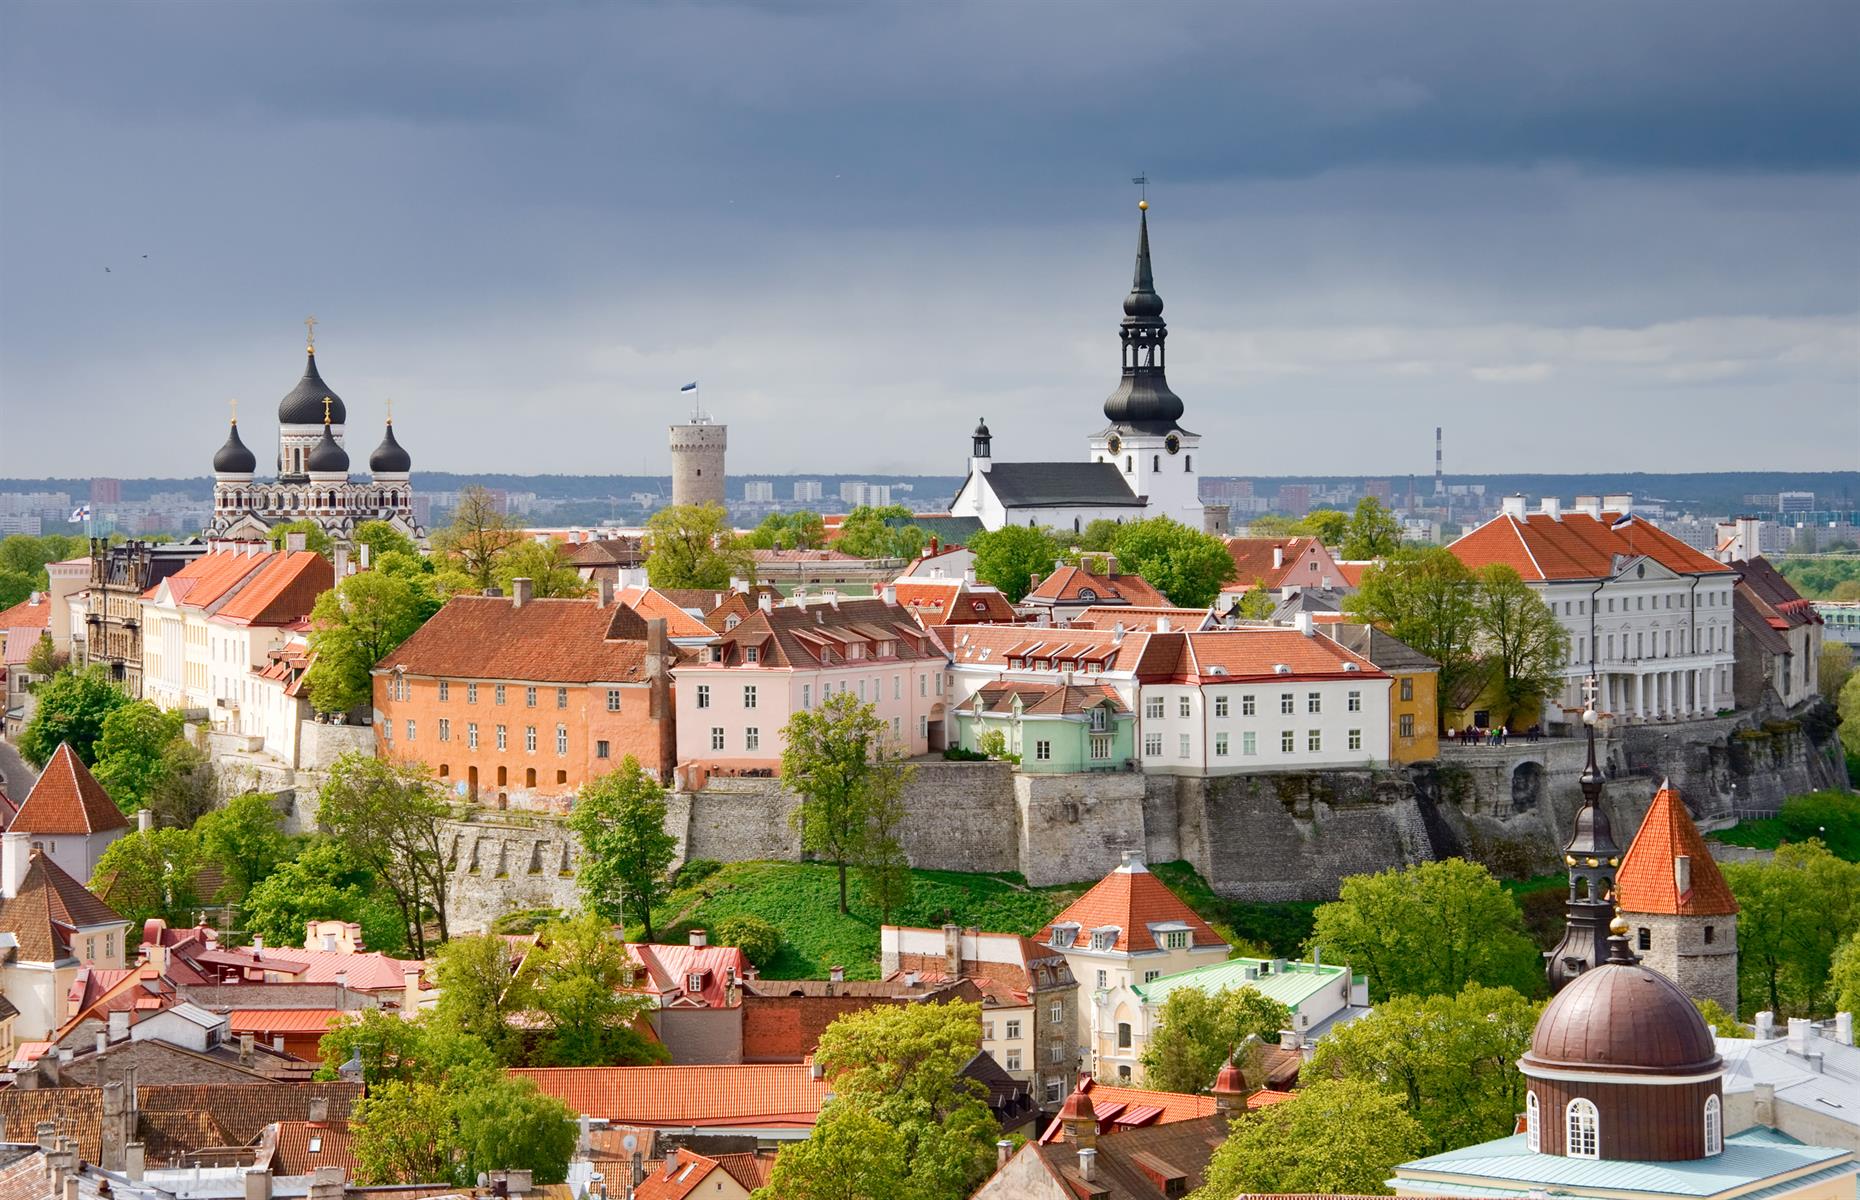 <p>Staying in Eastern Europe, Estonia (pictured) and Lithuania have the world's eighth most powerful passports, admitting residents to 187 countries without an existing visa.</p>  <p>Along with Latvia, the Baltic nations of Estonia and Lithuania were ruled by the Soviet Union until 1991 but still featured on America's official diplomatic list during that period. Since they had no sovereignty at home, national passports were solely issued by their consulates in New York. </p>